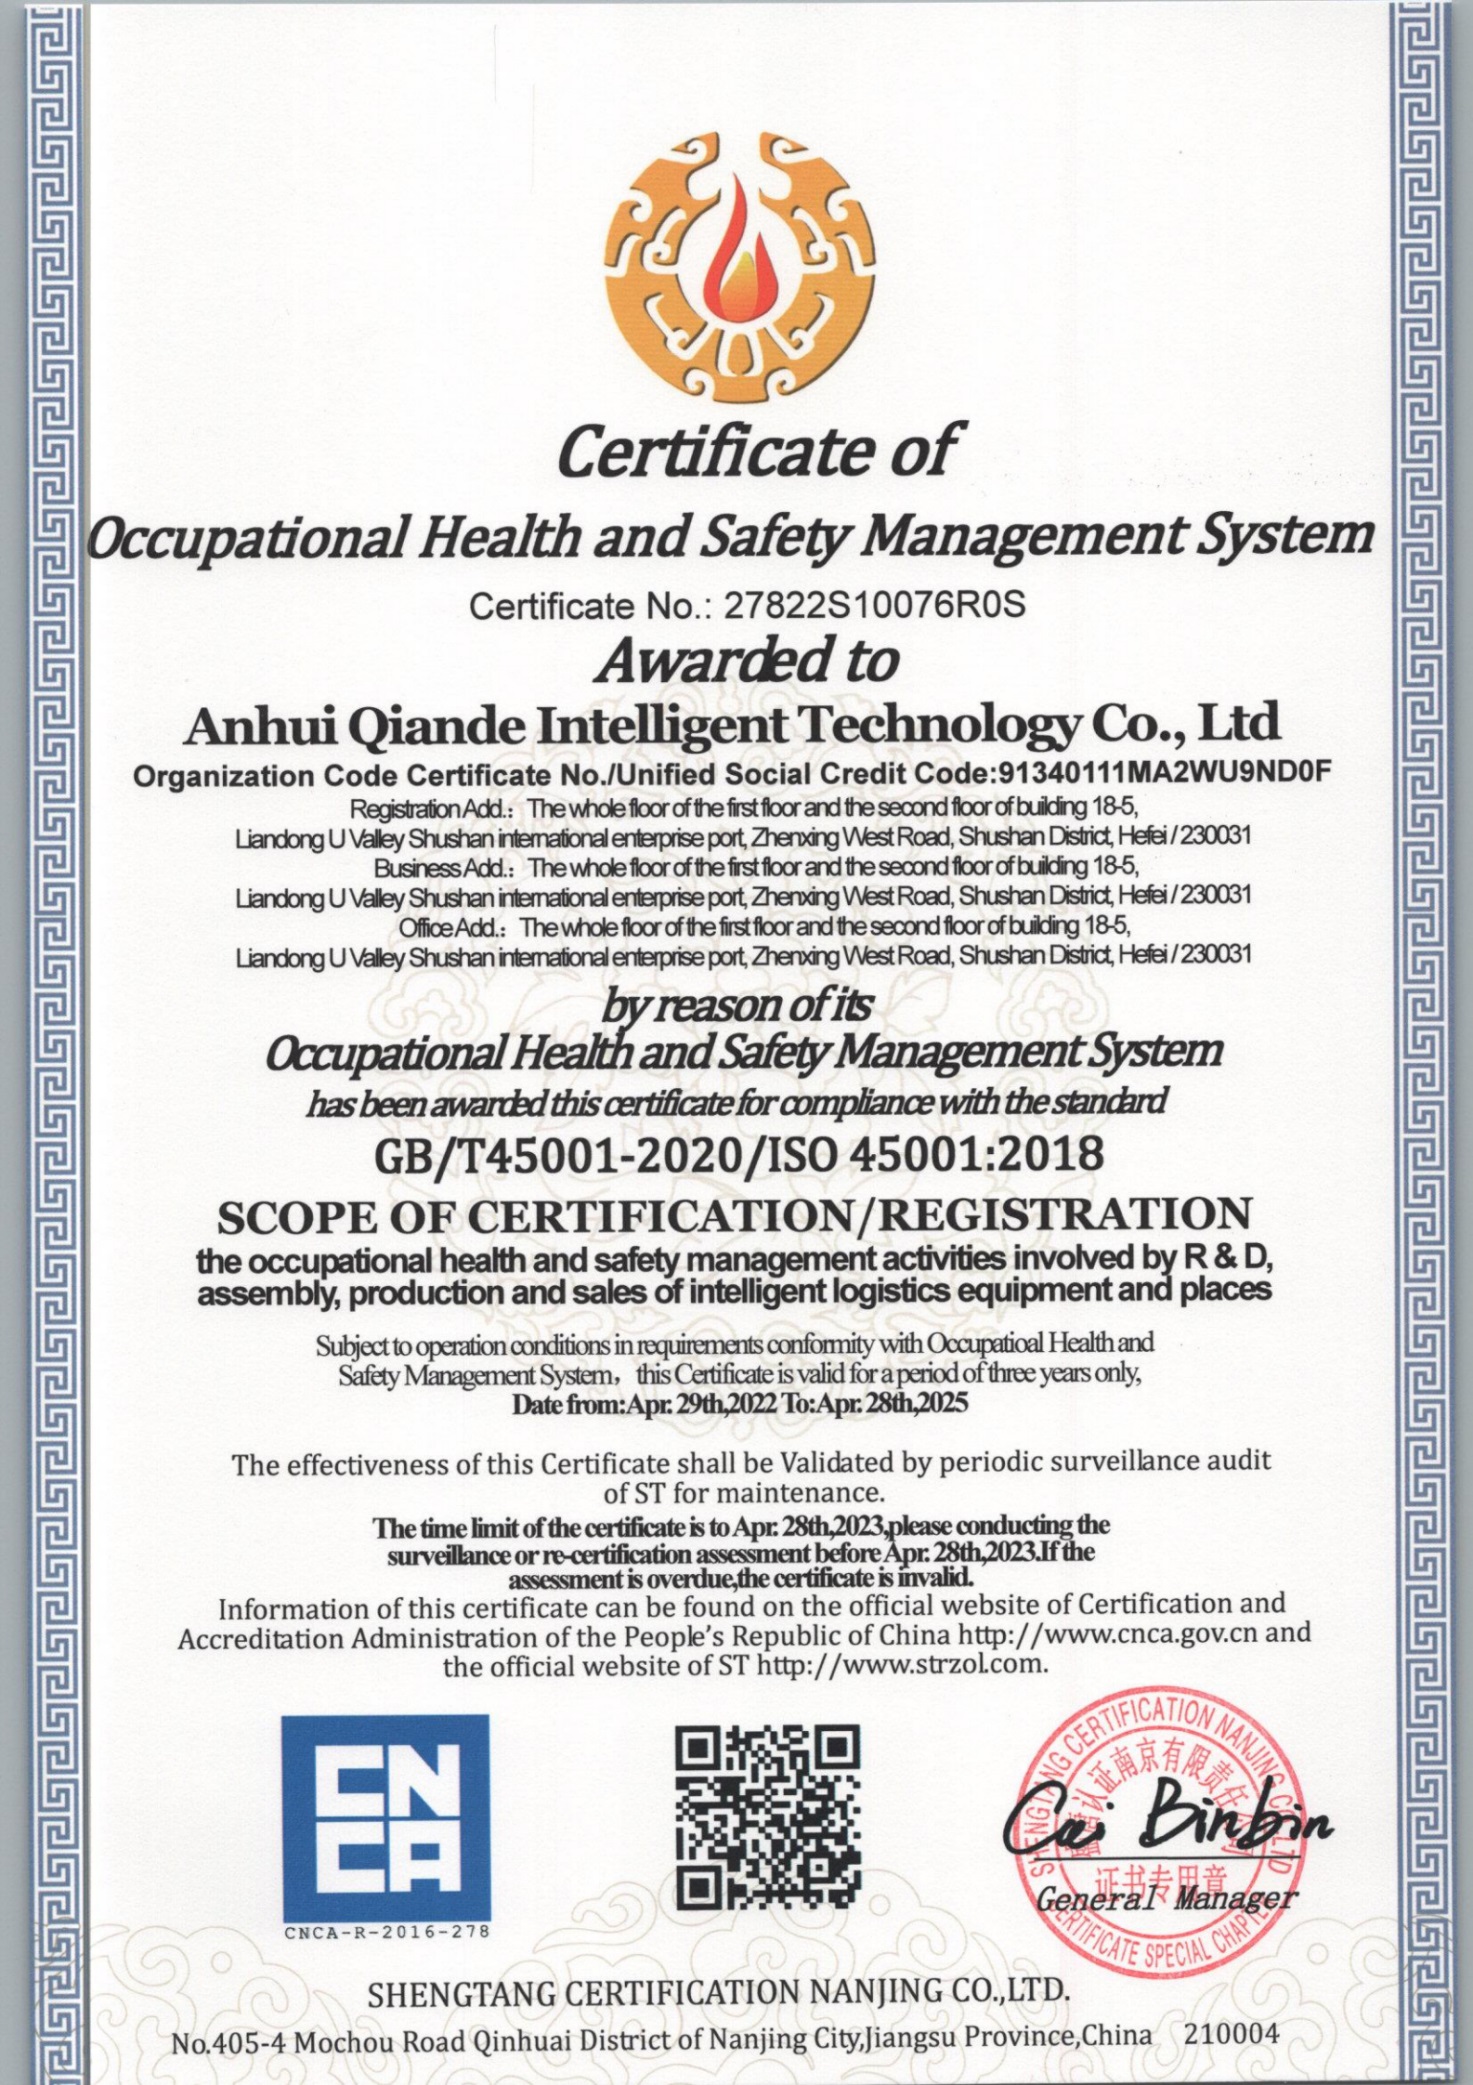 Certificate of Occupational Health and Safety Management.jpg